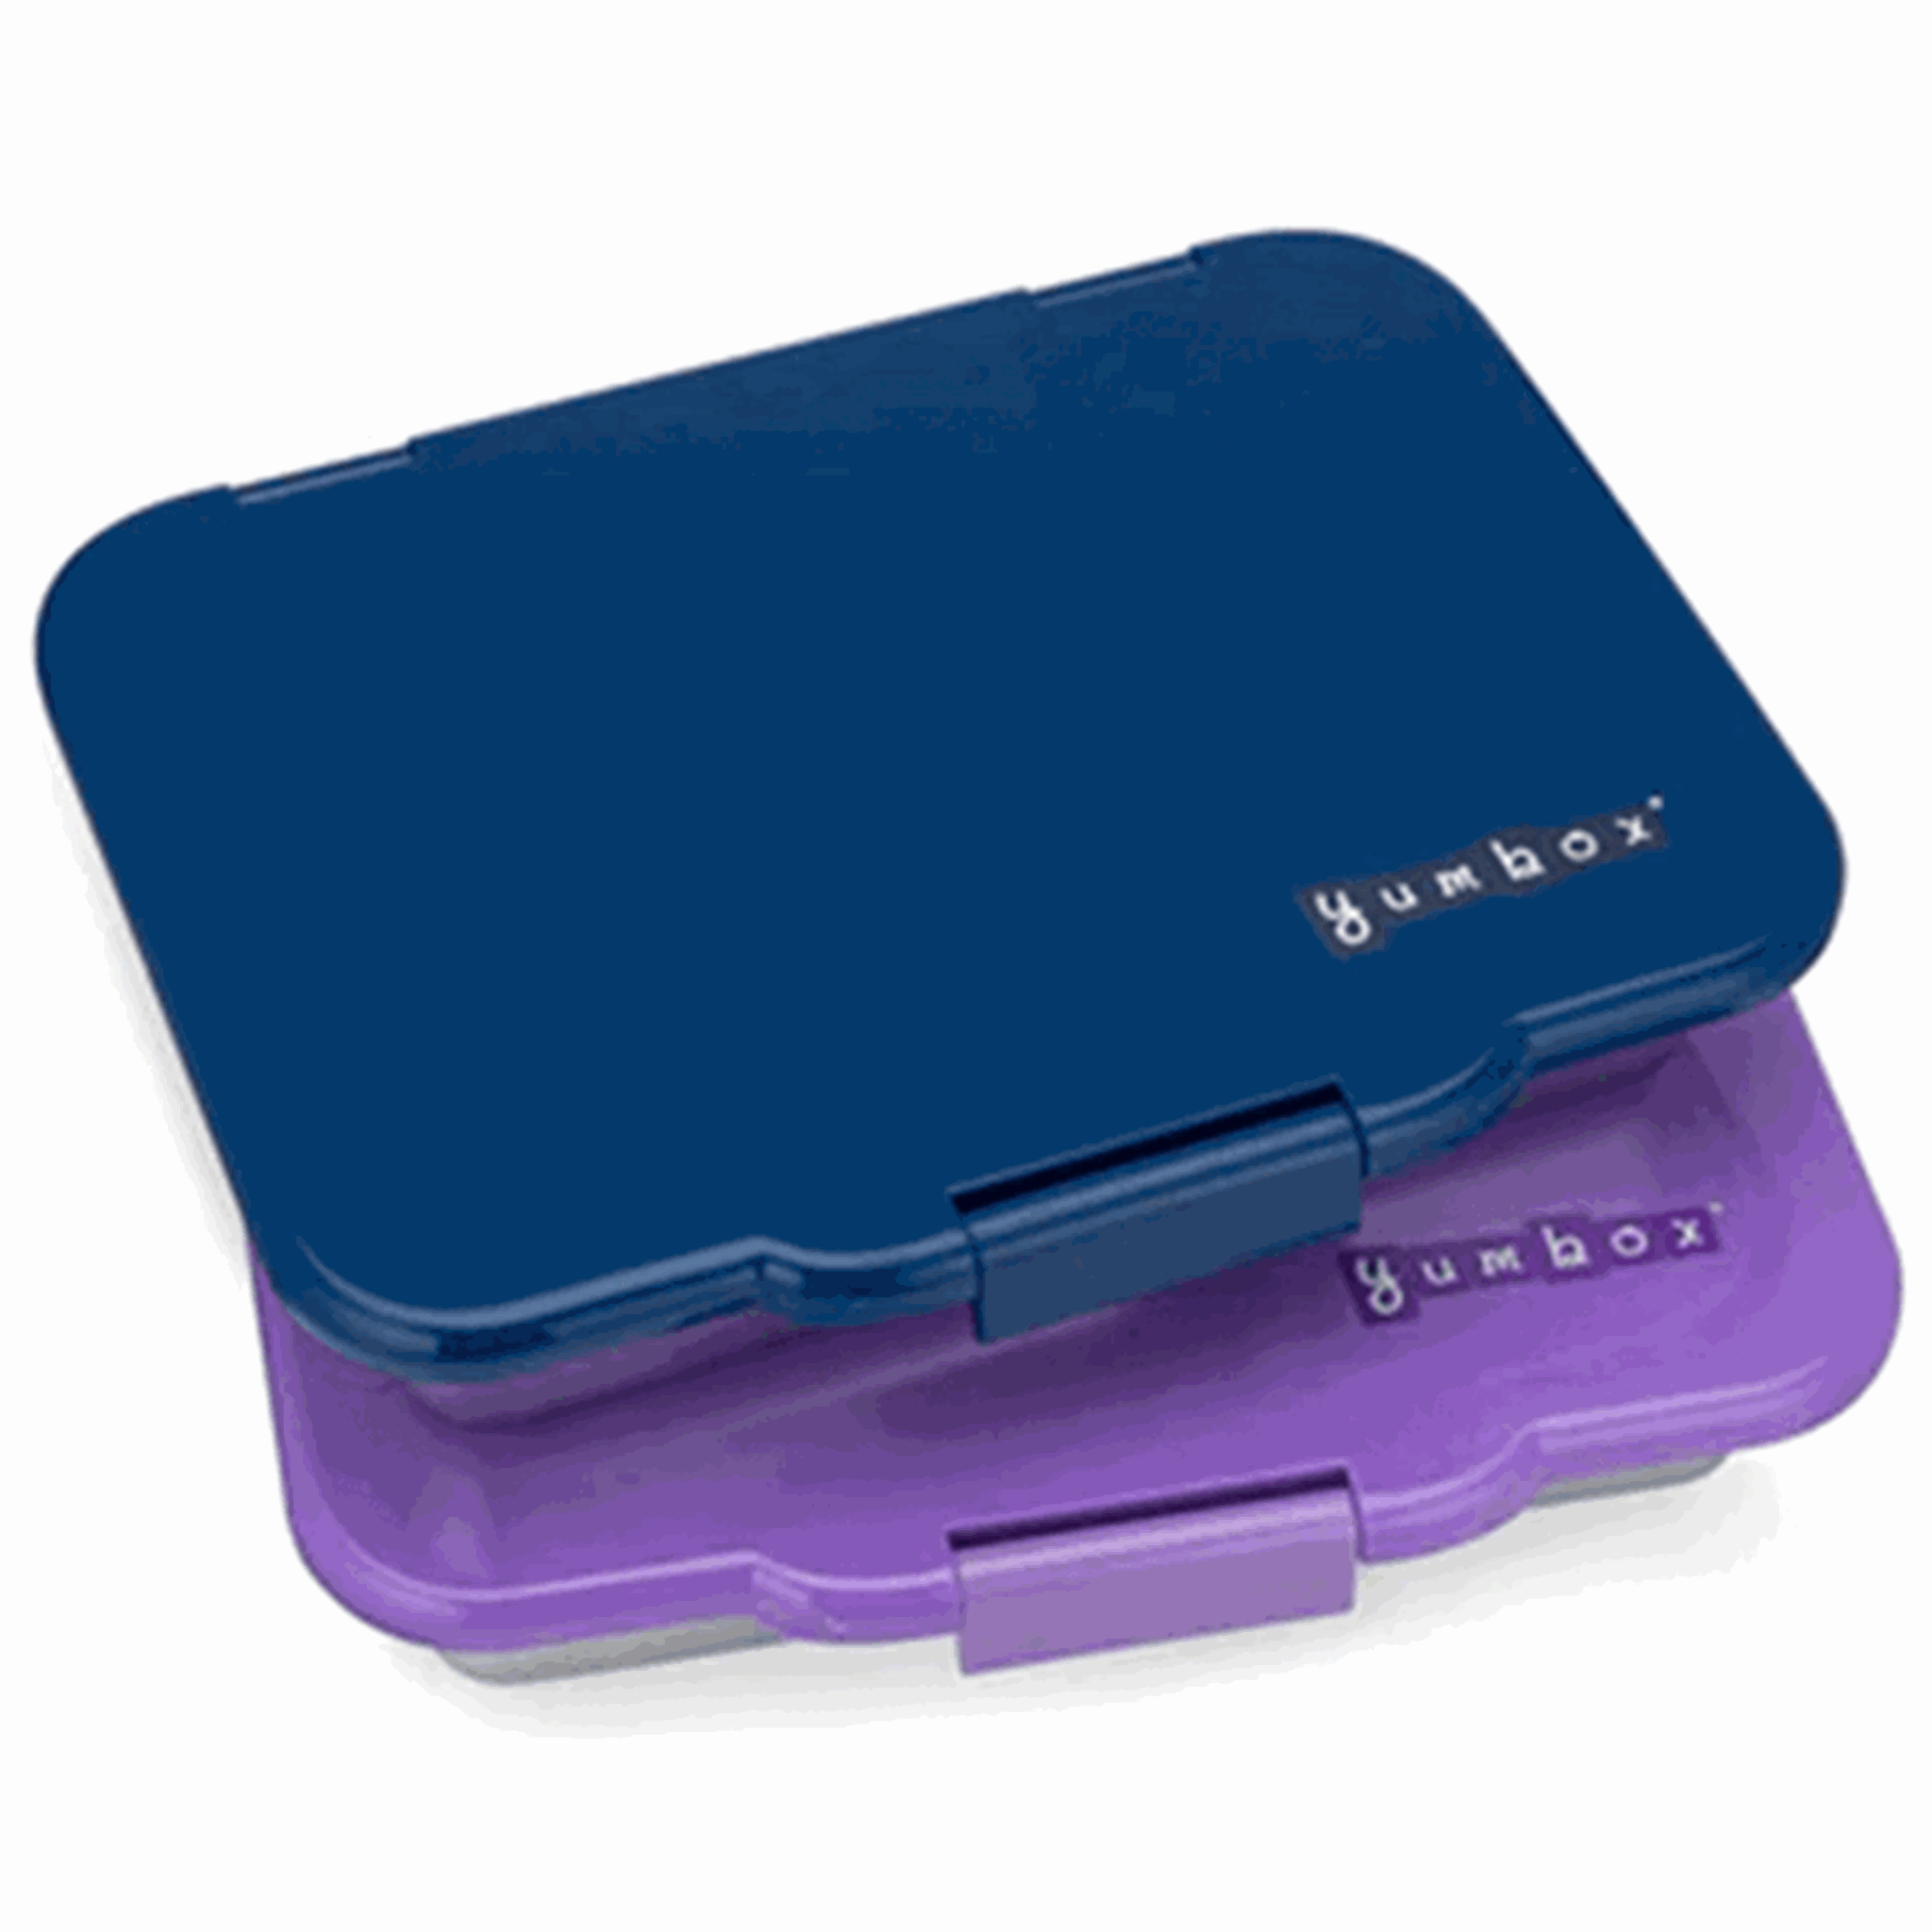 Yumbox Presto Stainless Steel Lunch Box Remy Lavender 7